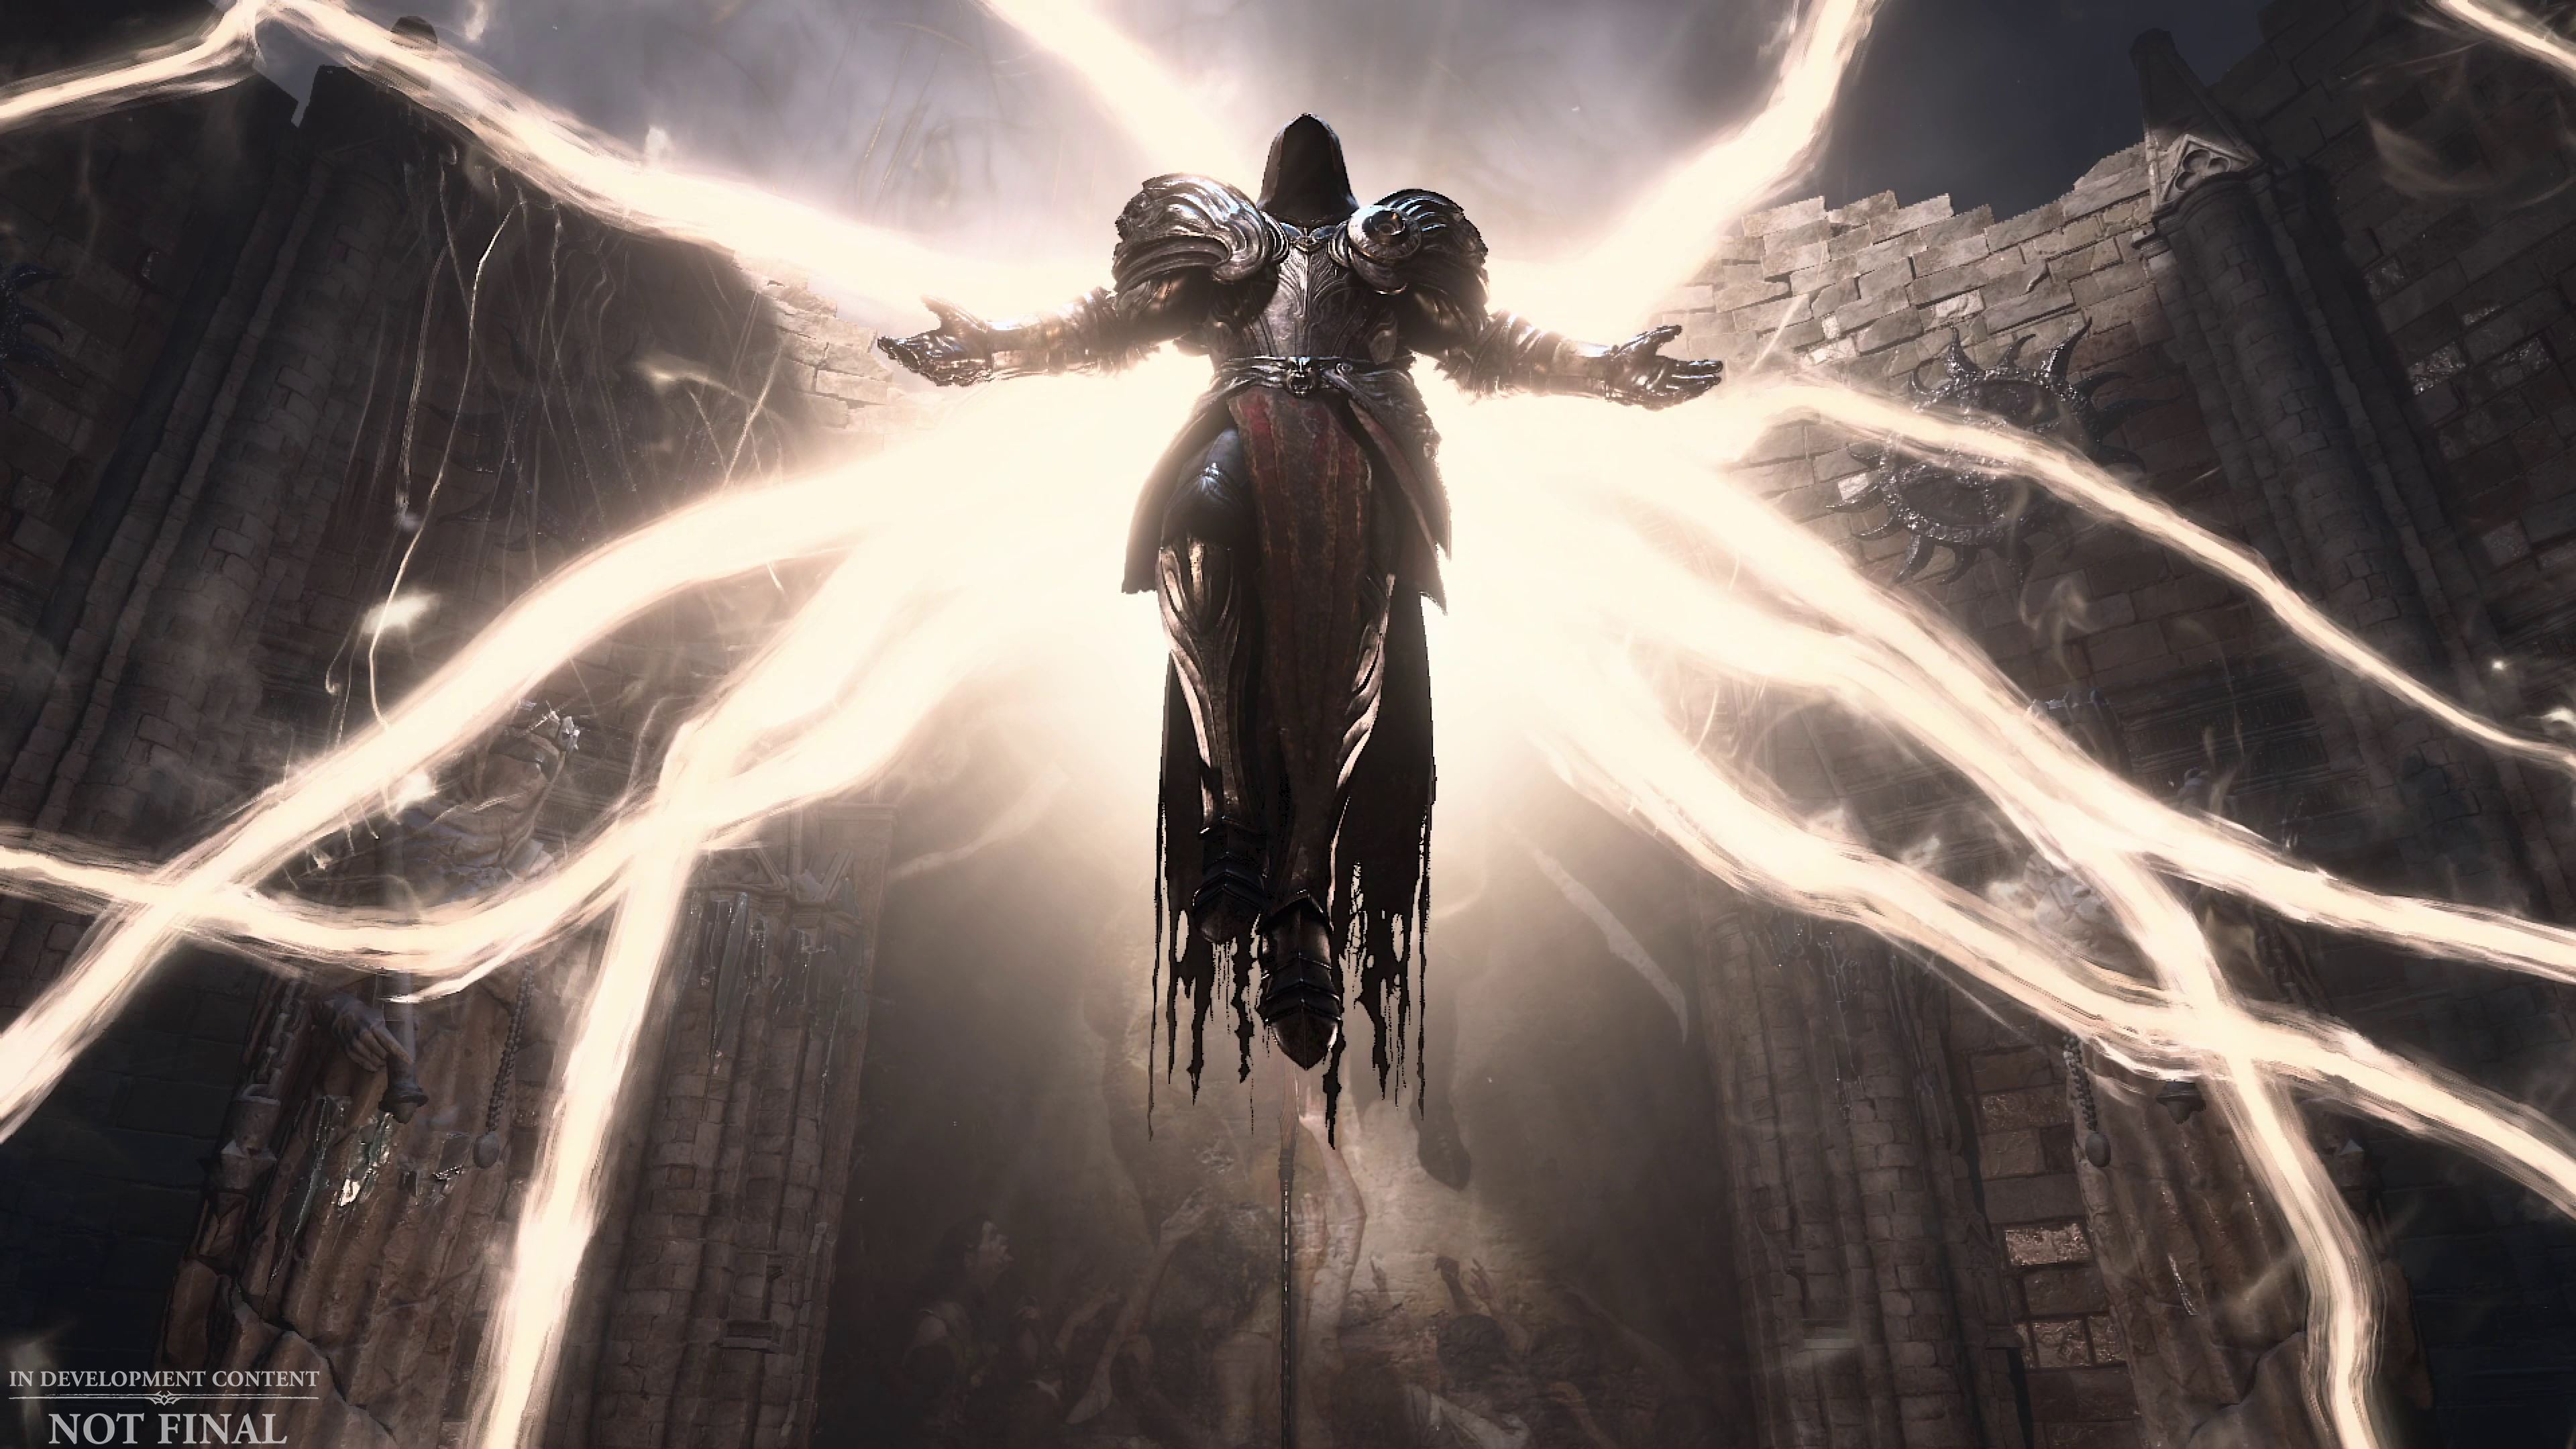 Inarius, an angel with wings made of light, descends on the player in Diablo 4